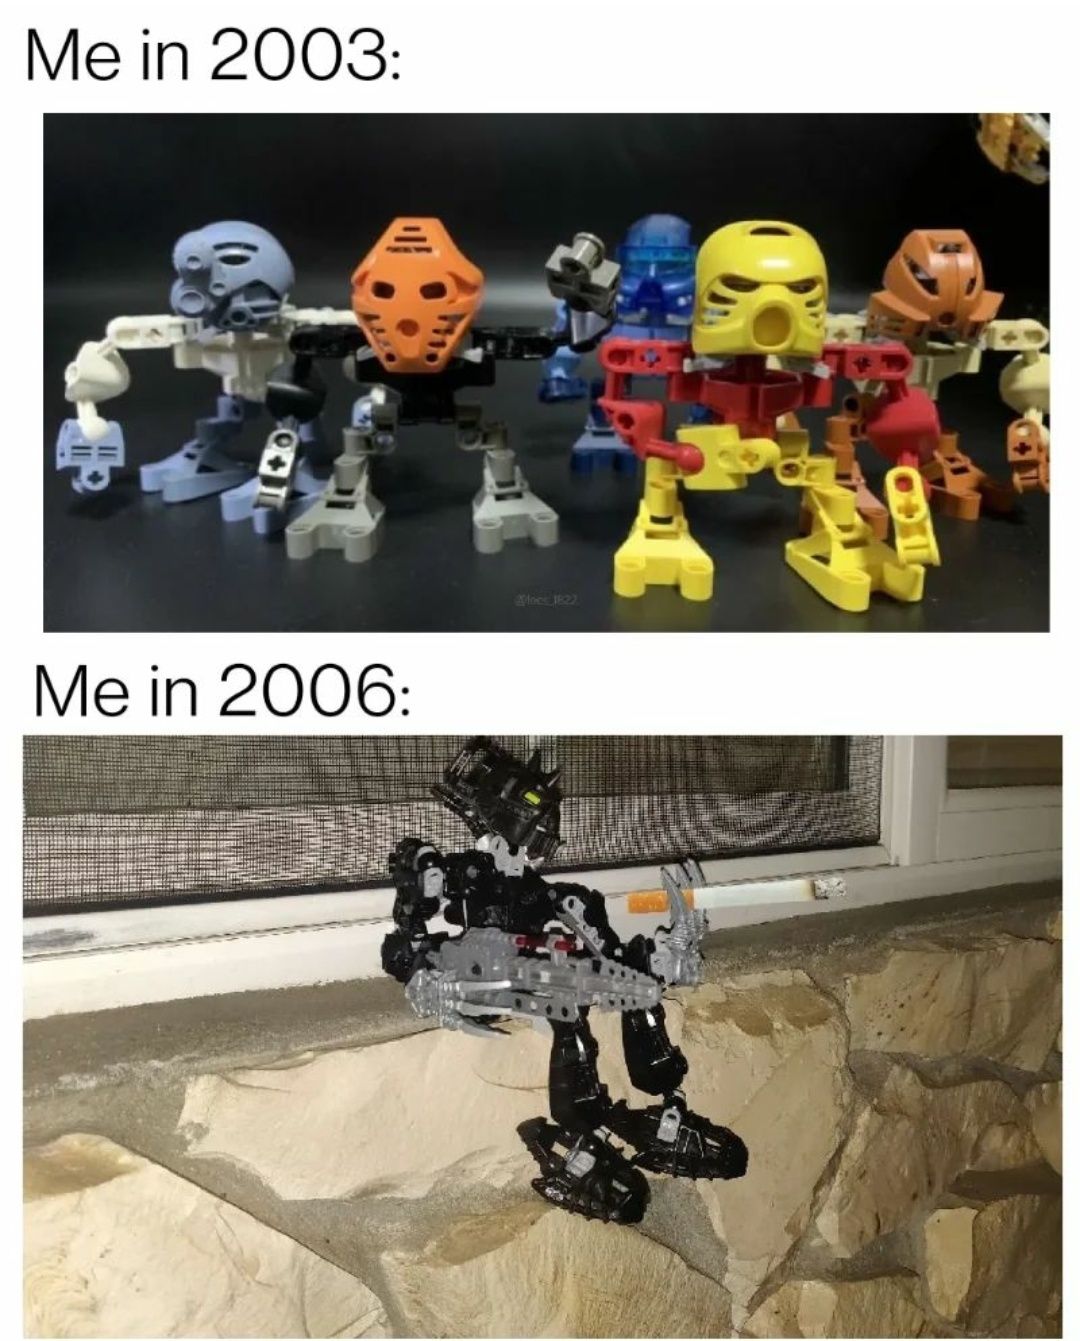 Sorry for the spam fellas, I got busy building a new bionicle community